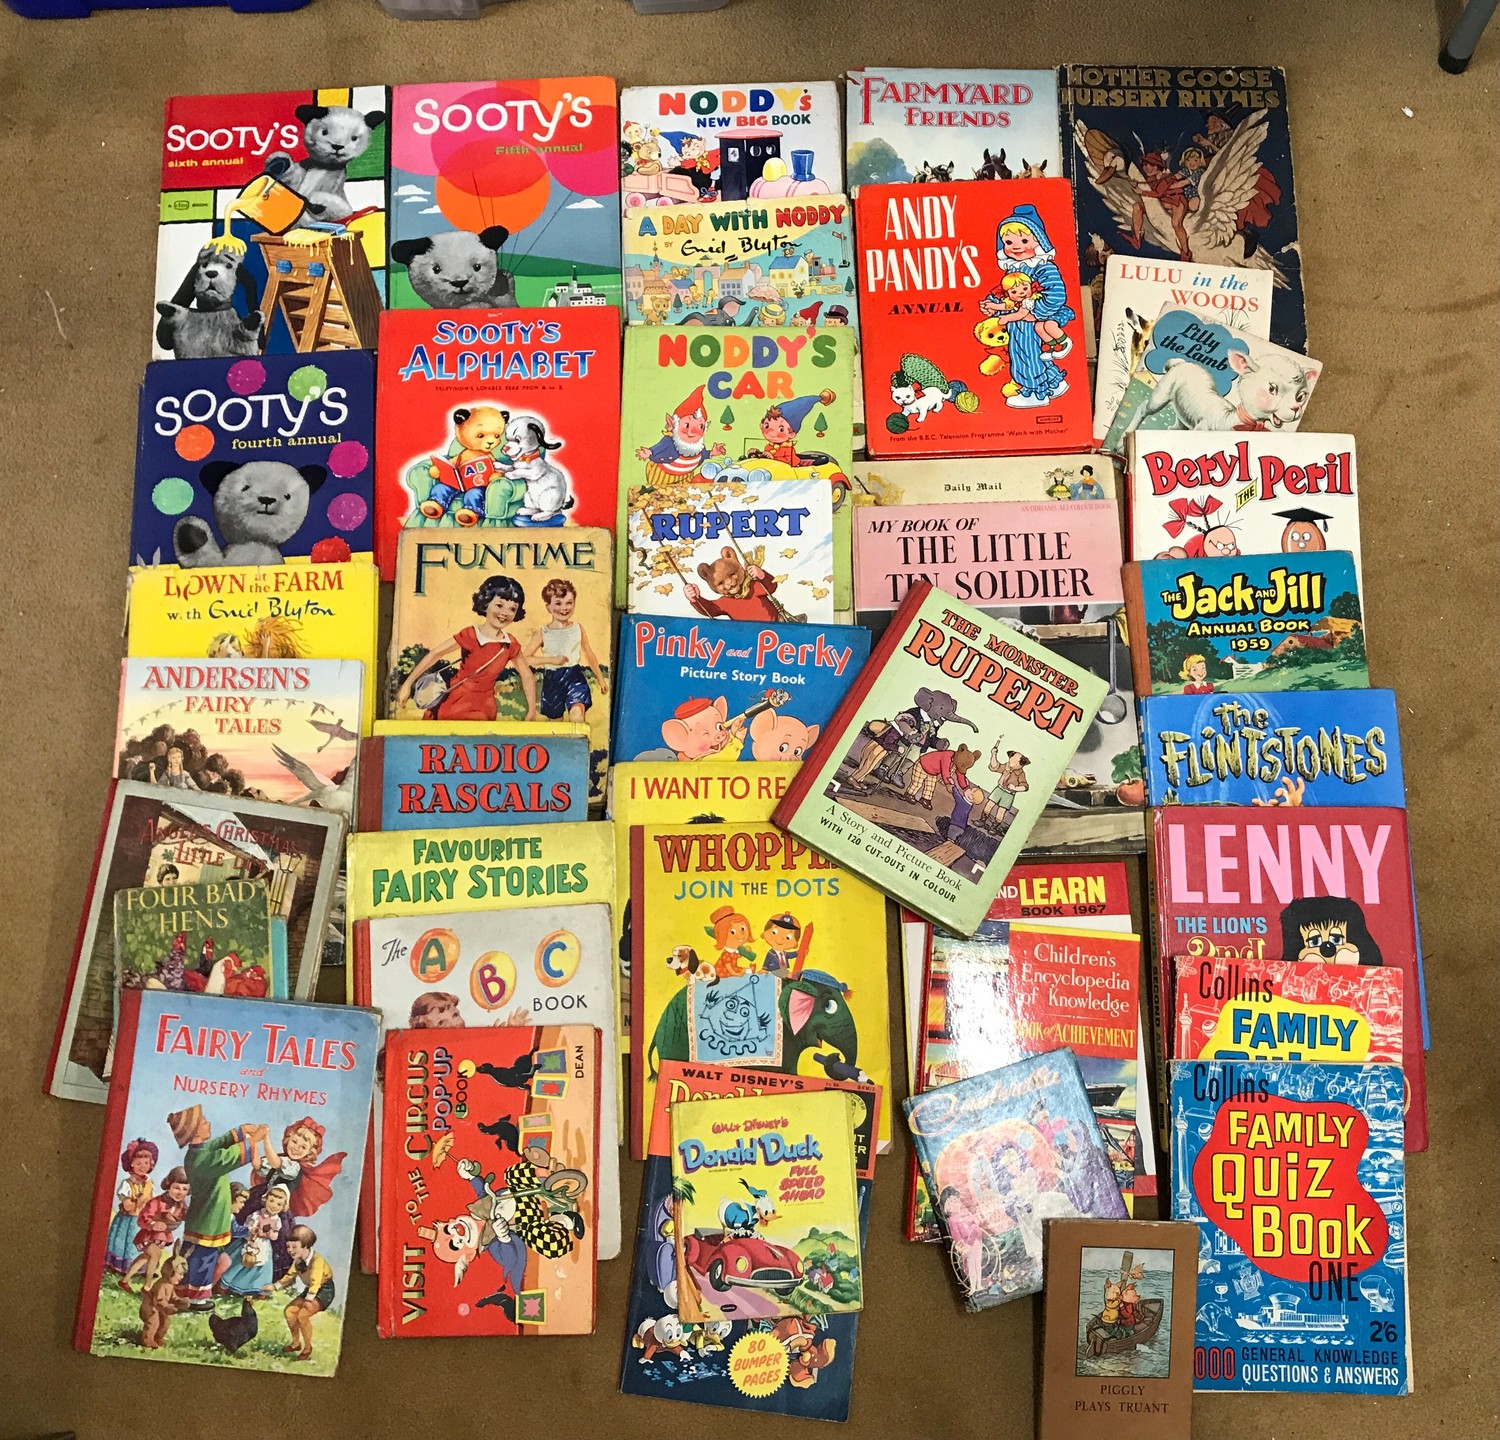 Collection of children's annuals and fiction books, Sooty, Andy Pandy,  Pinky and Perky, Rupert Monst